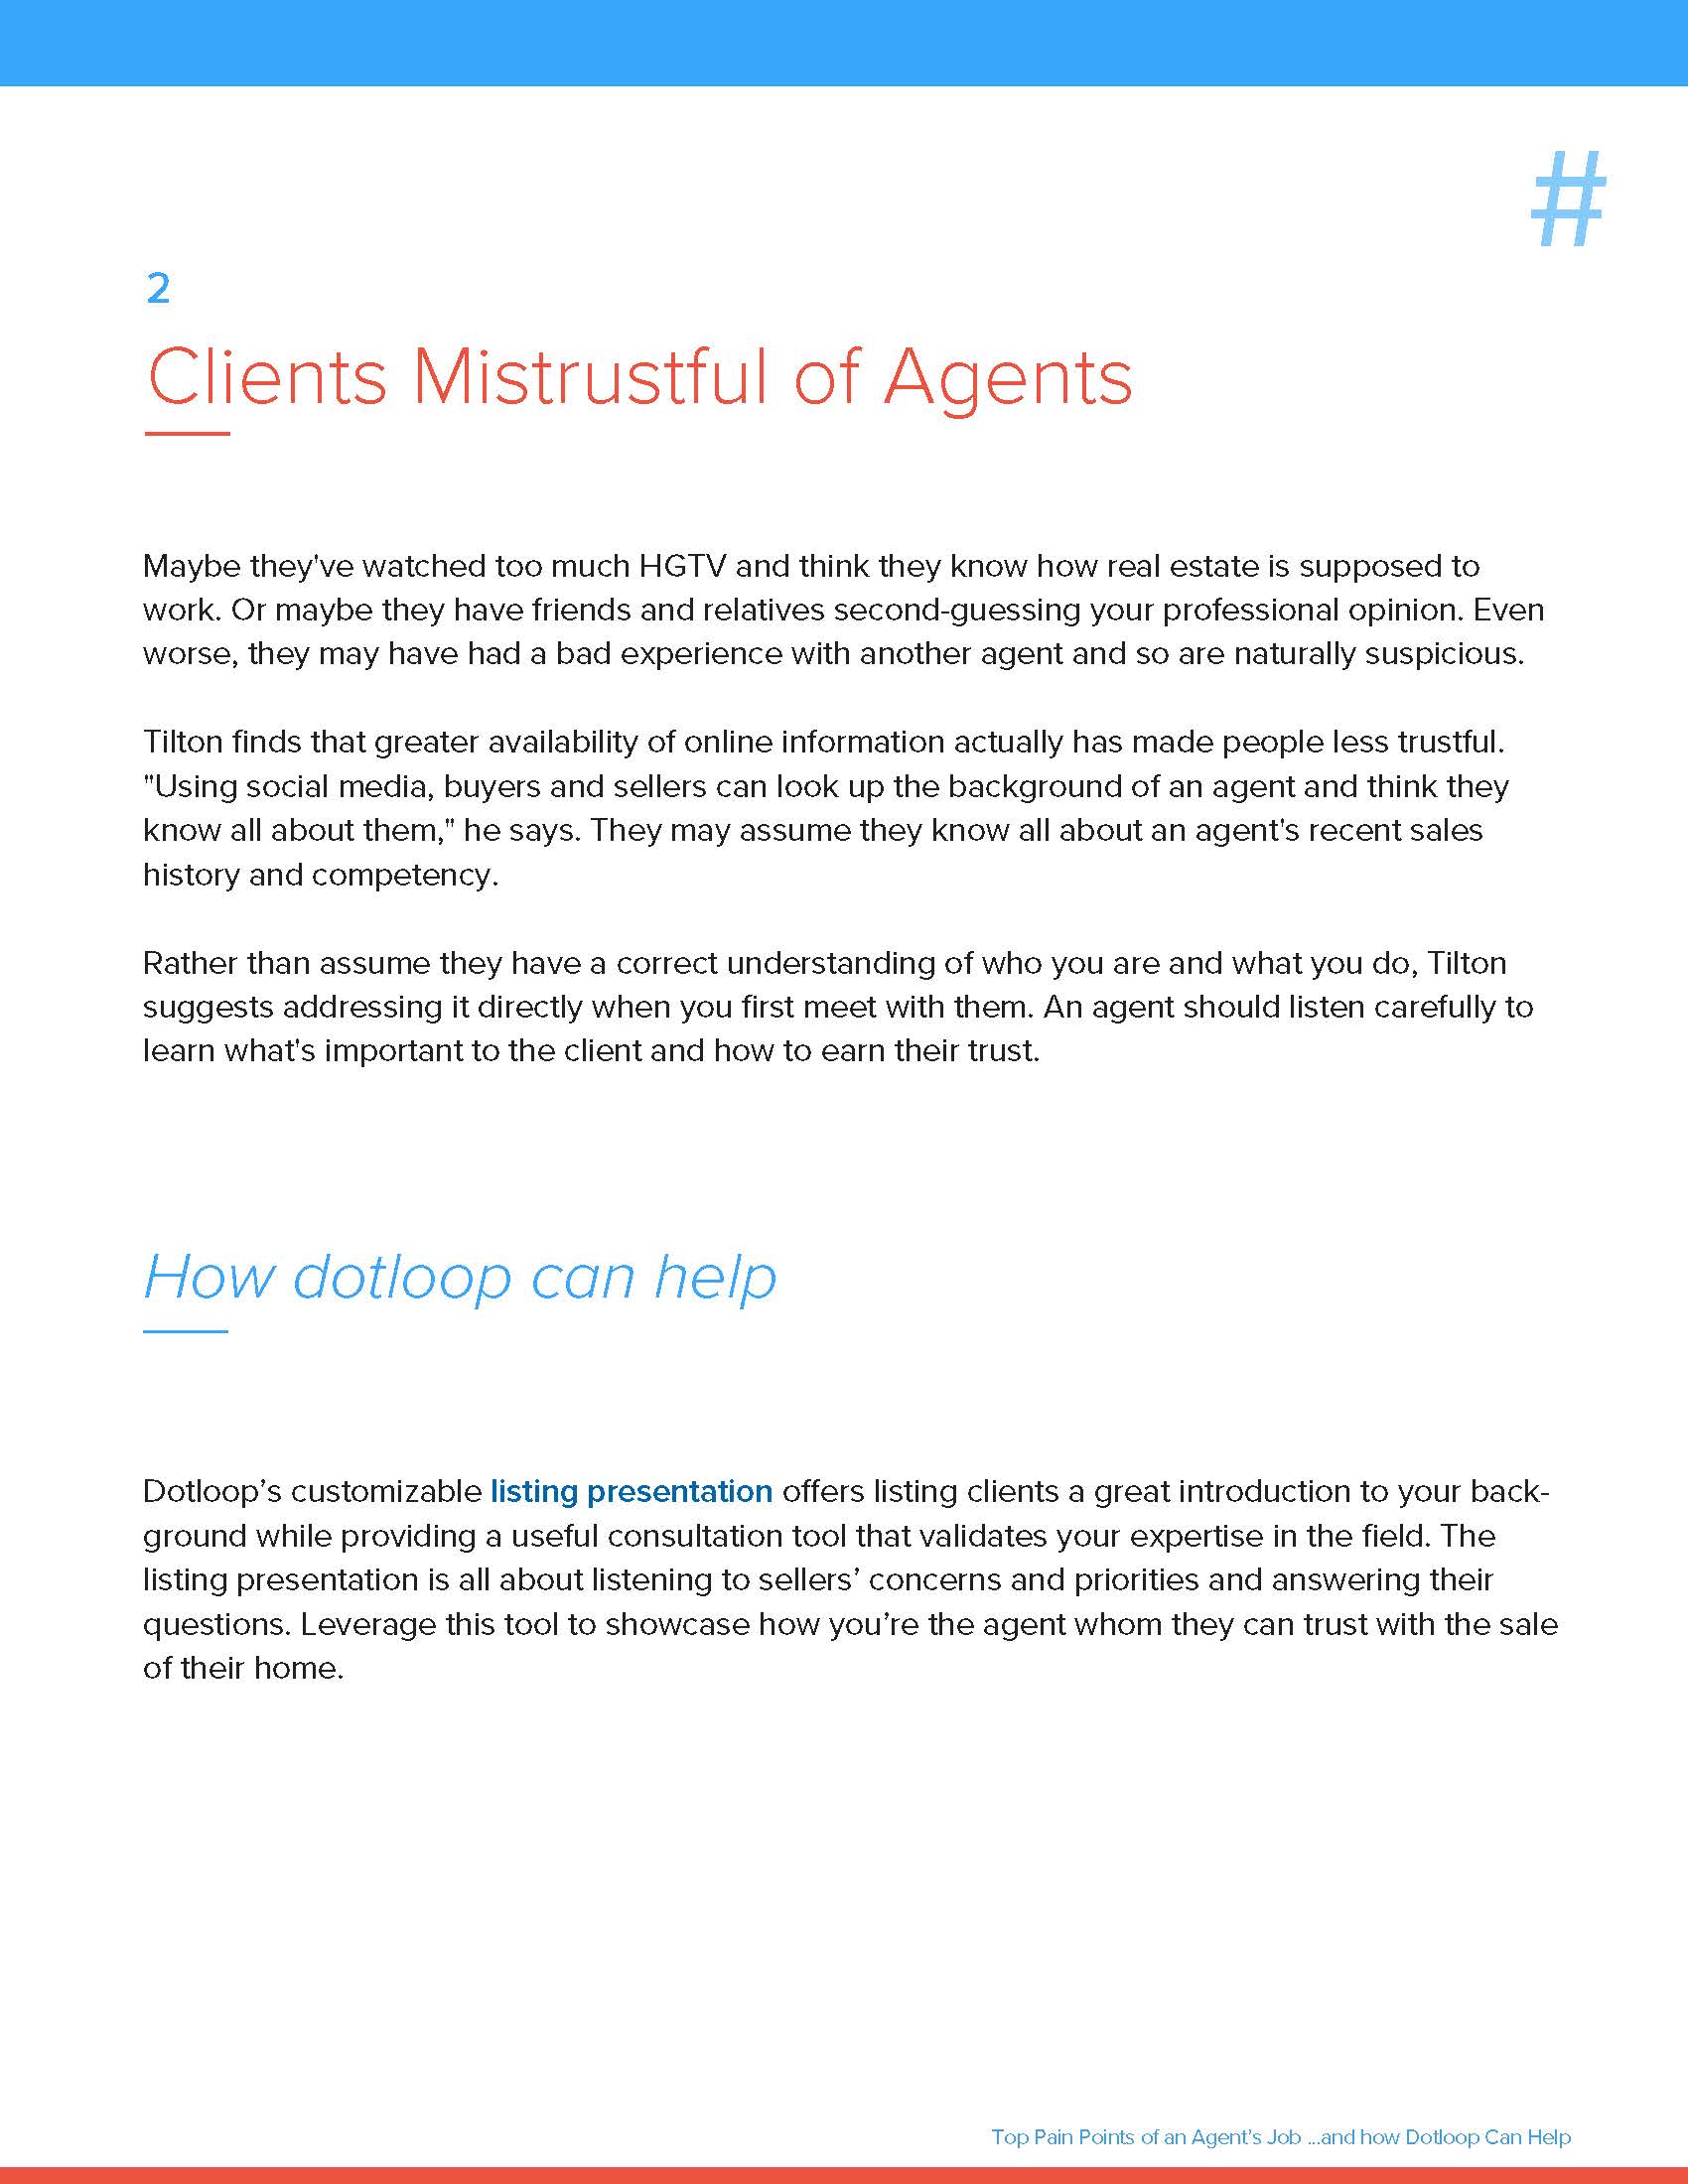 5 Common Agent Pain Points Eased by Tech pg 6